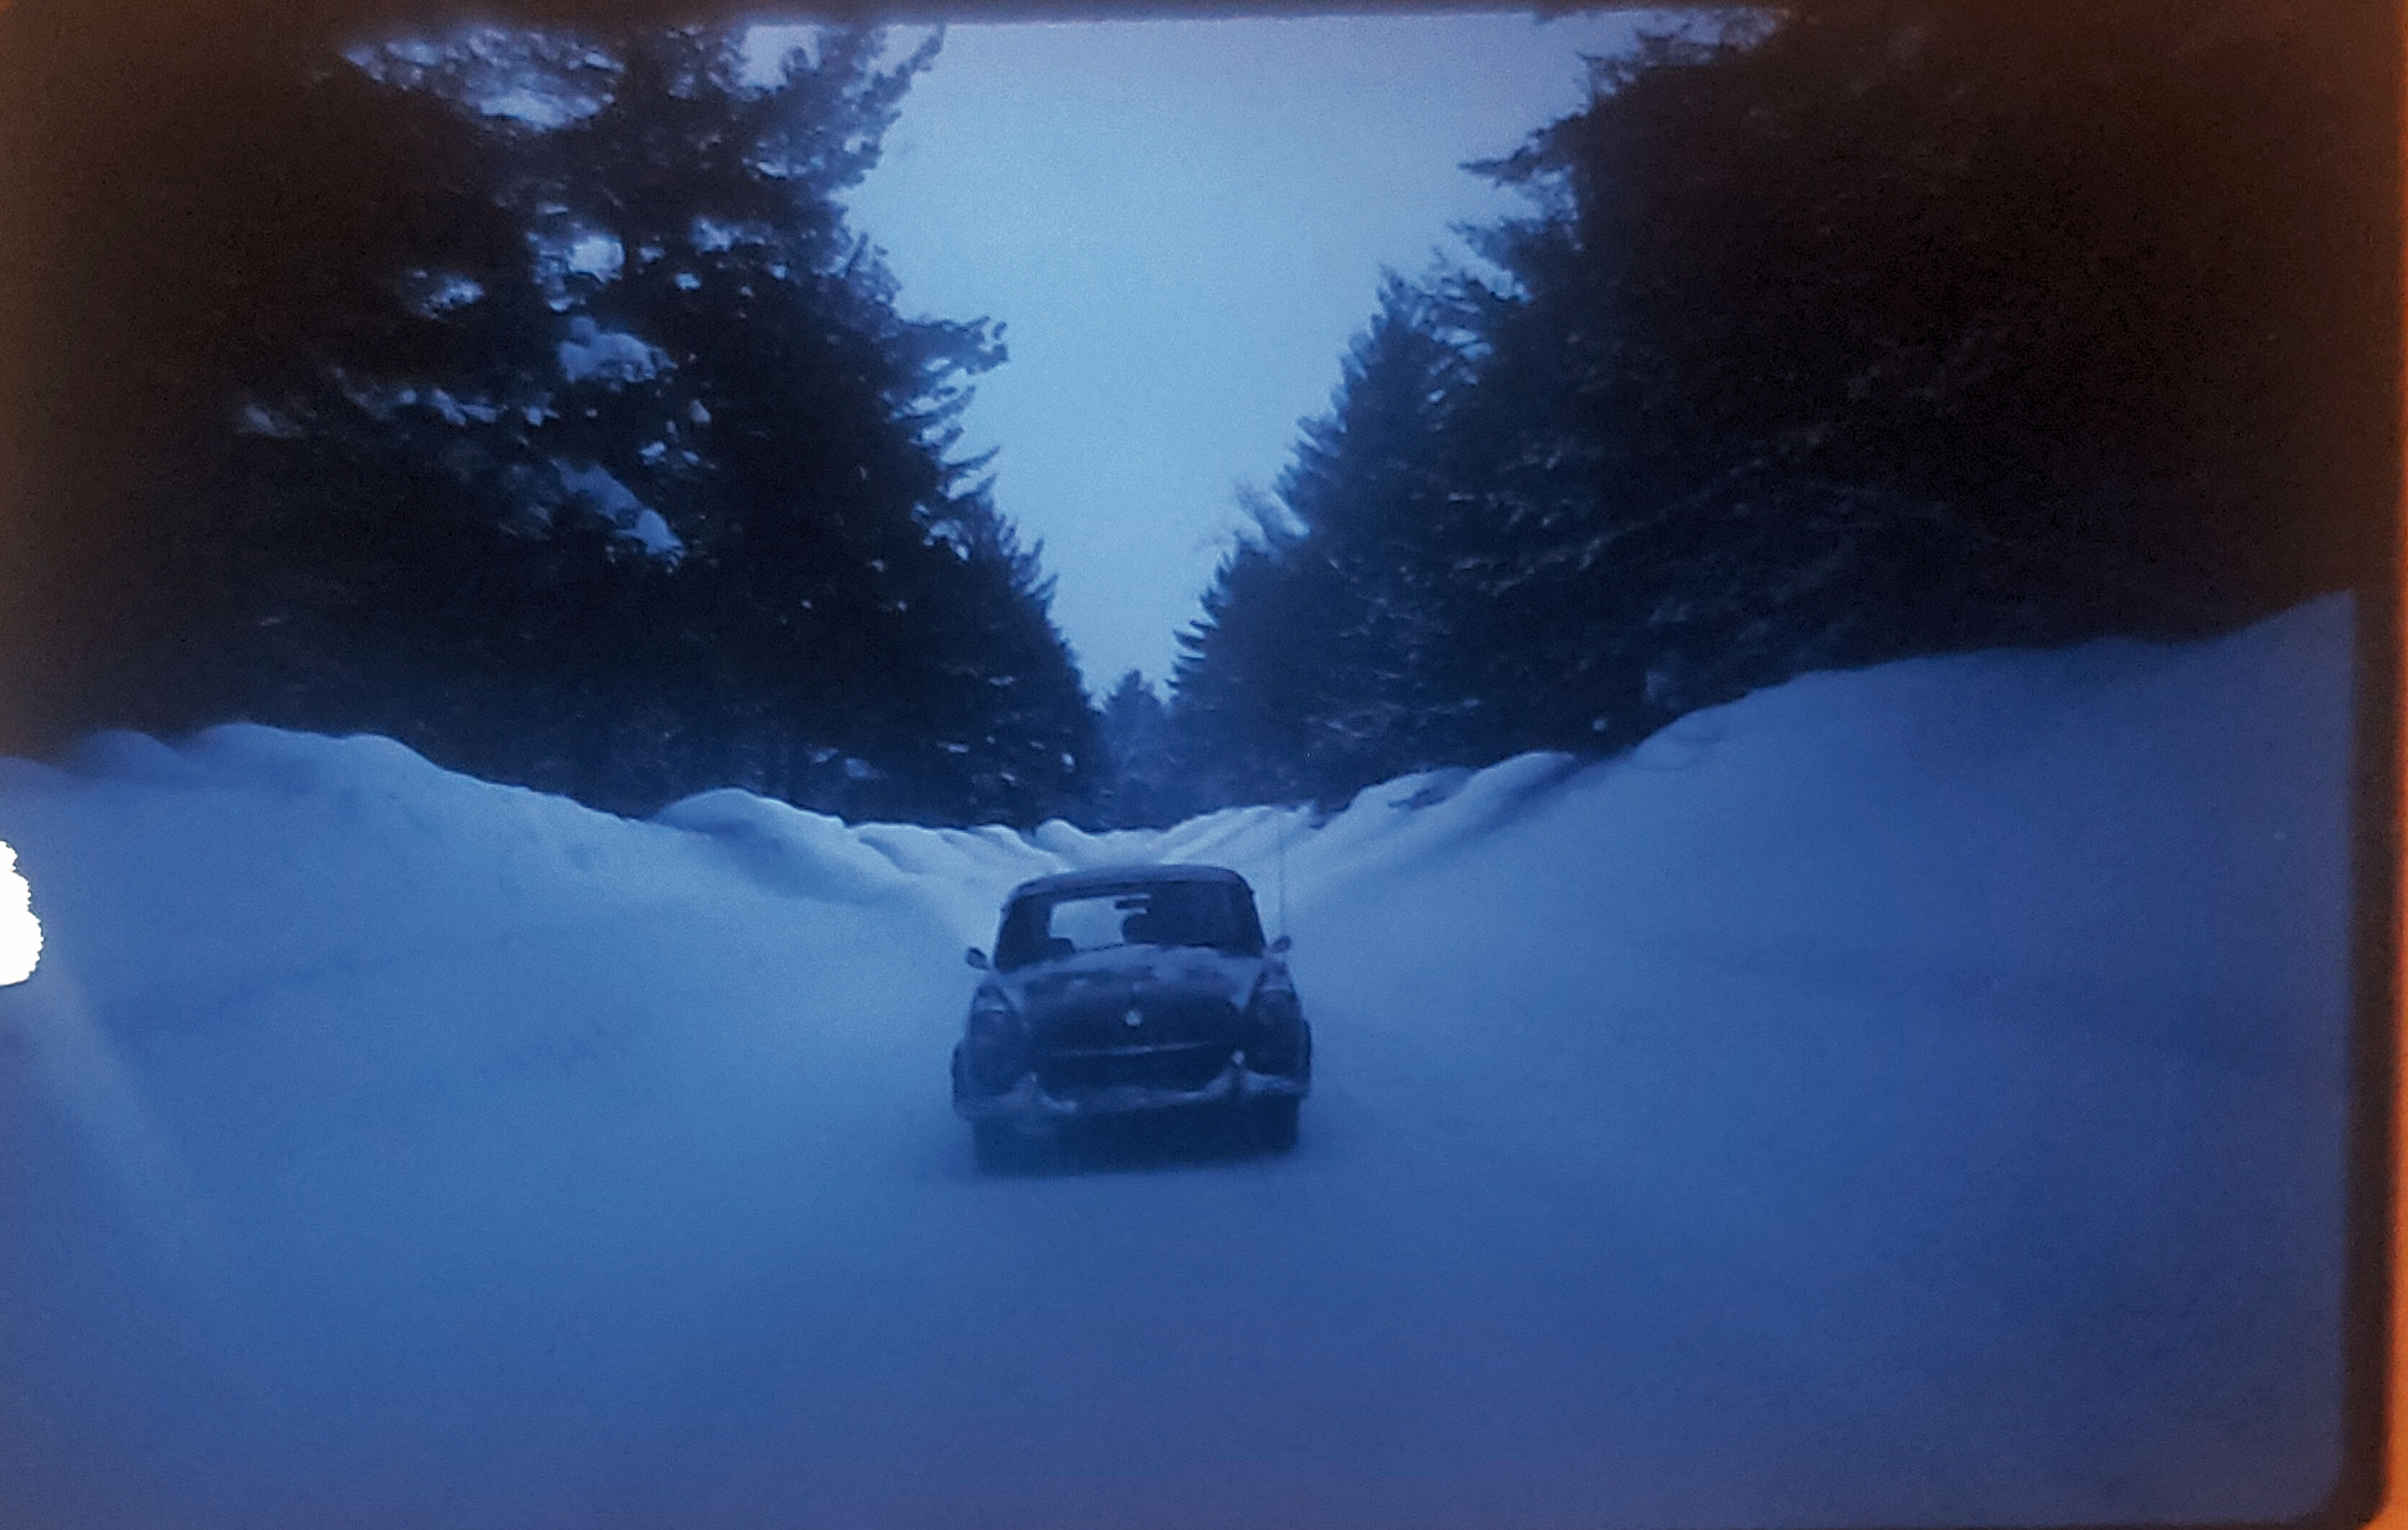 Rte.93 between Sweden and Lovell, Maine
February, 1969 
VW Squareback
